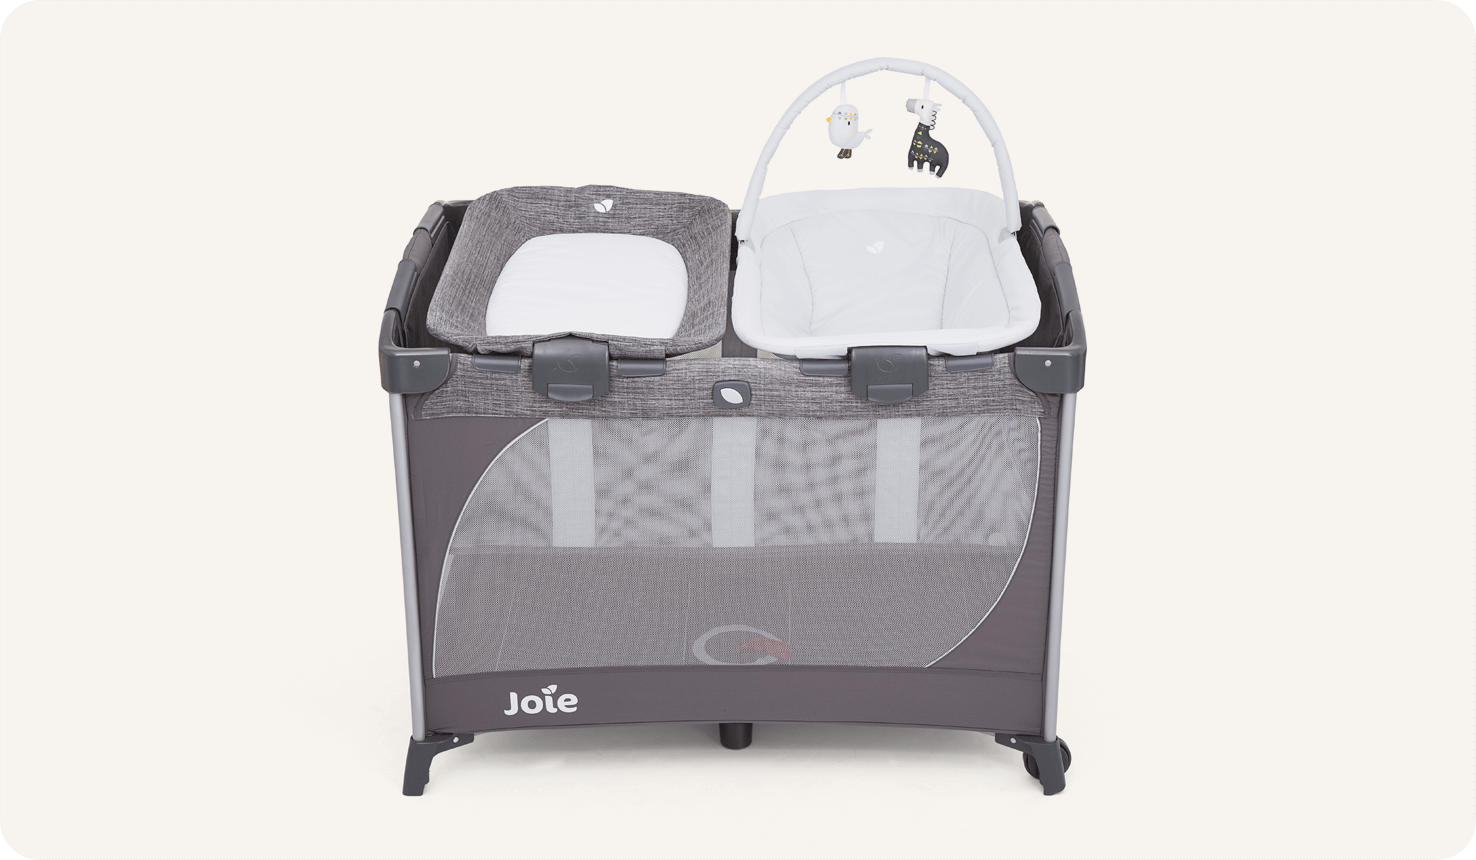 Joie travel cot commuter change & snoozer in grey with a bassinet and changer at side and top view.